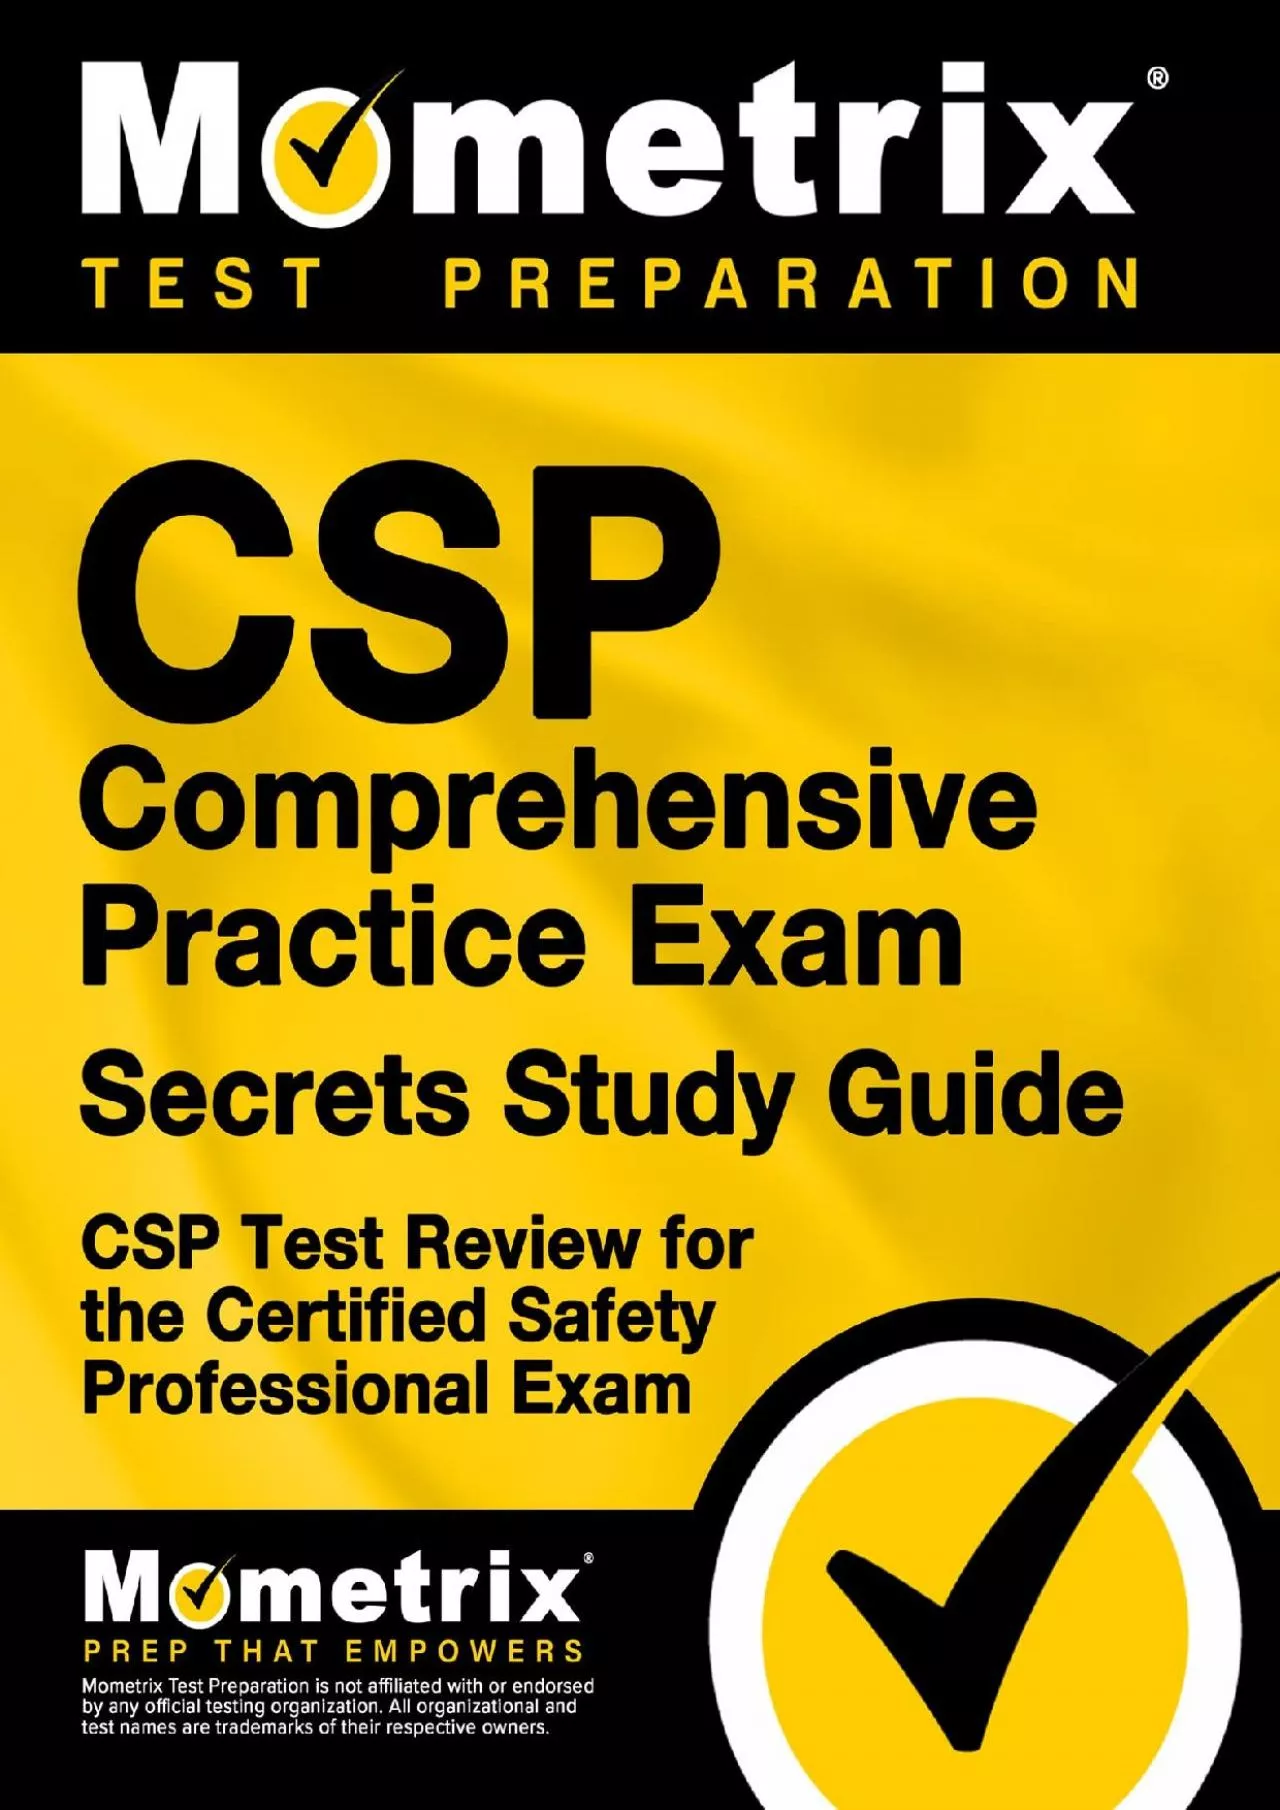 [DOWNLOAD] CSP Comprehensive Practice Exam Secrets Study Guide: CSP Test Review for the